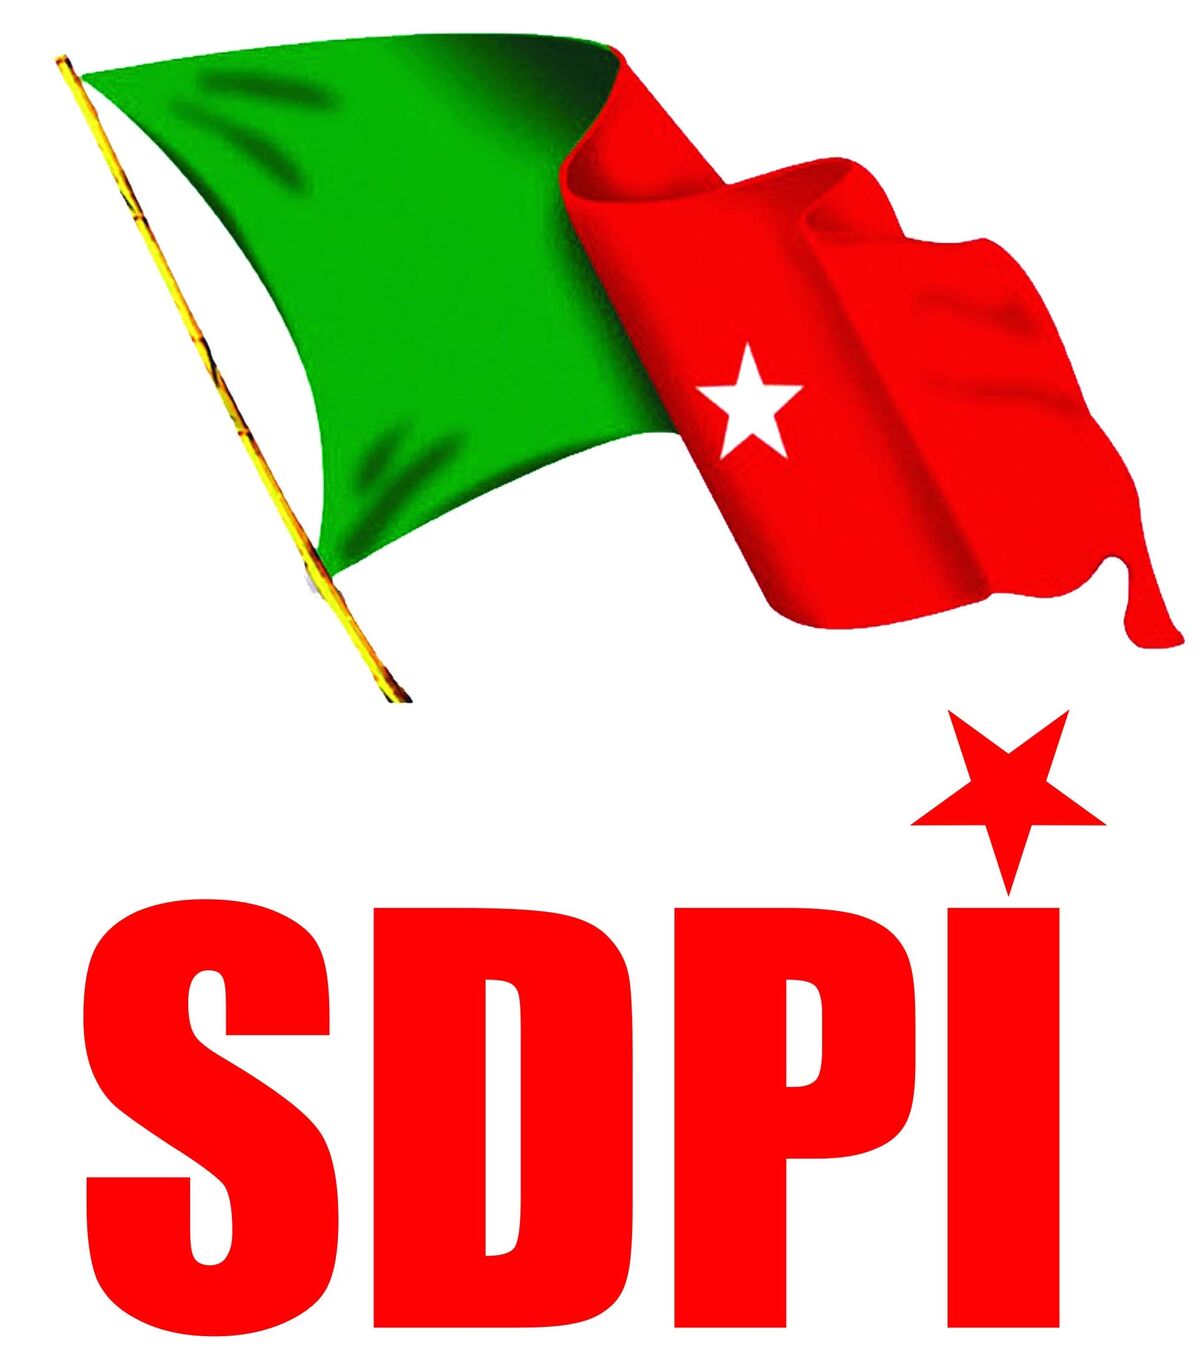 What is your behind-the-scenes agreement with SDPI